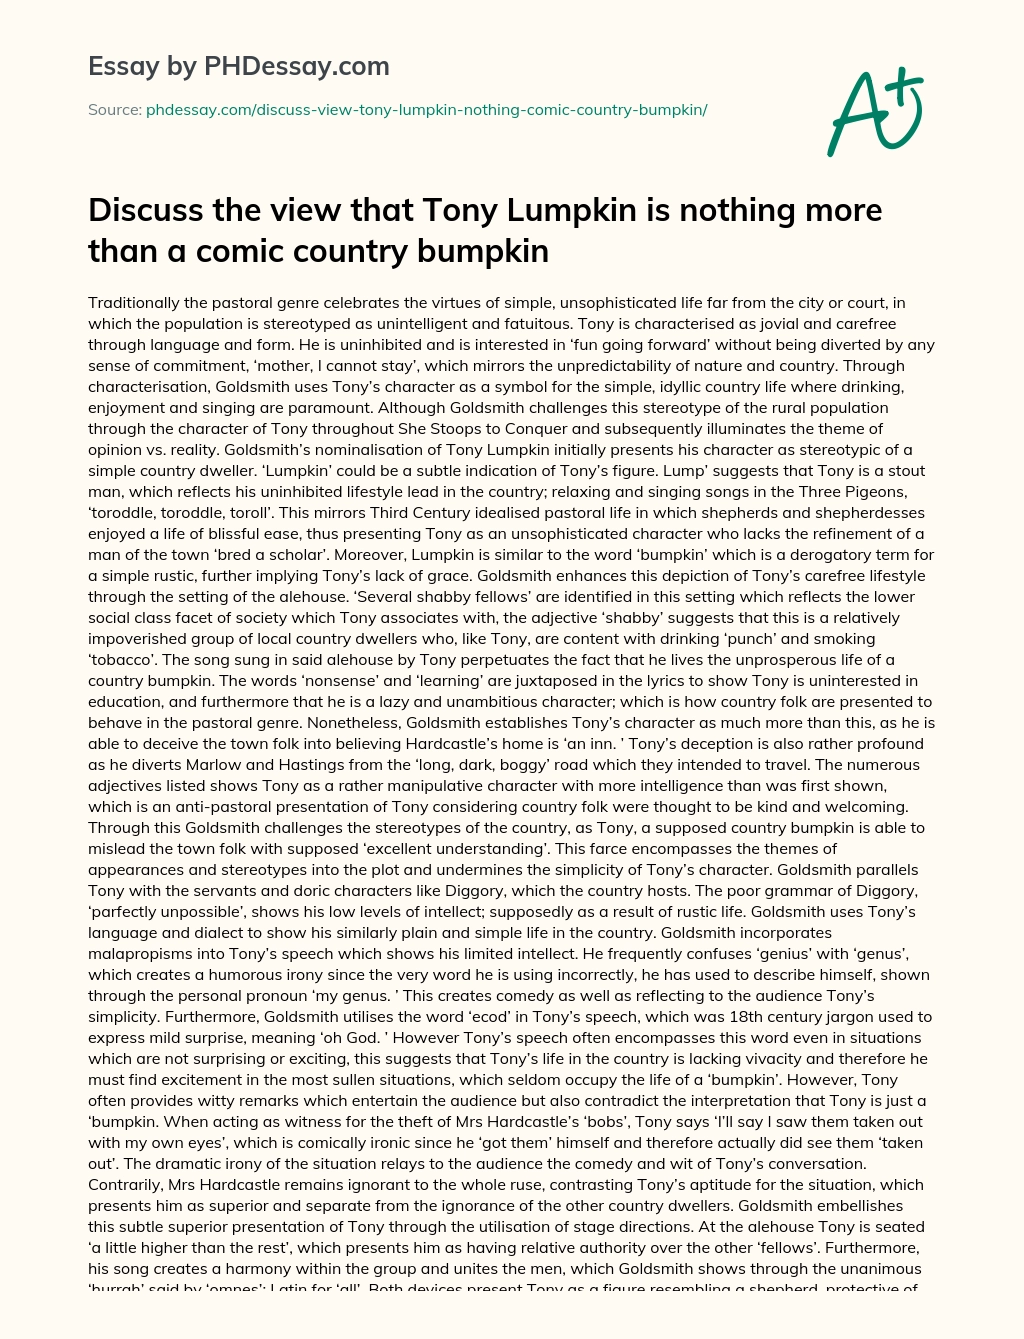 Discuss the view that Tony Lumpkin is nothing more than a comic country bumpkin essay